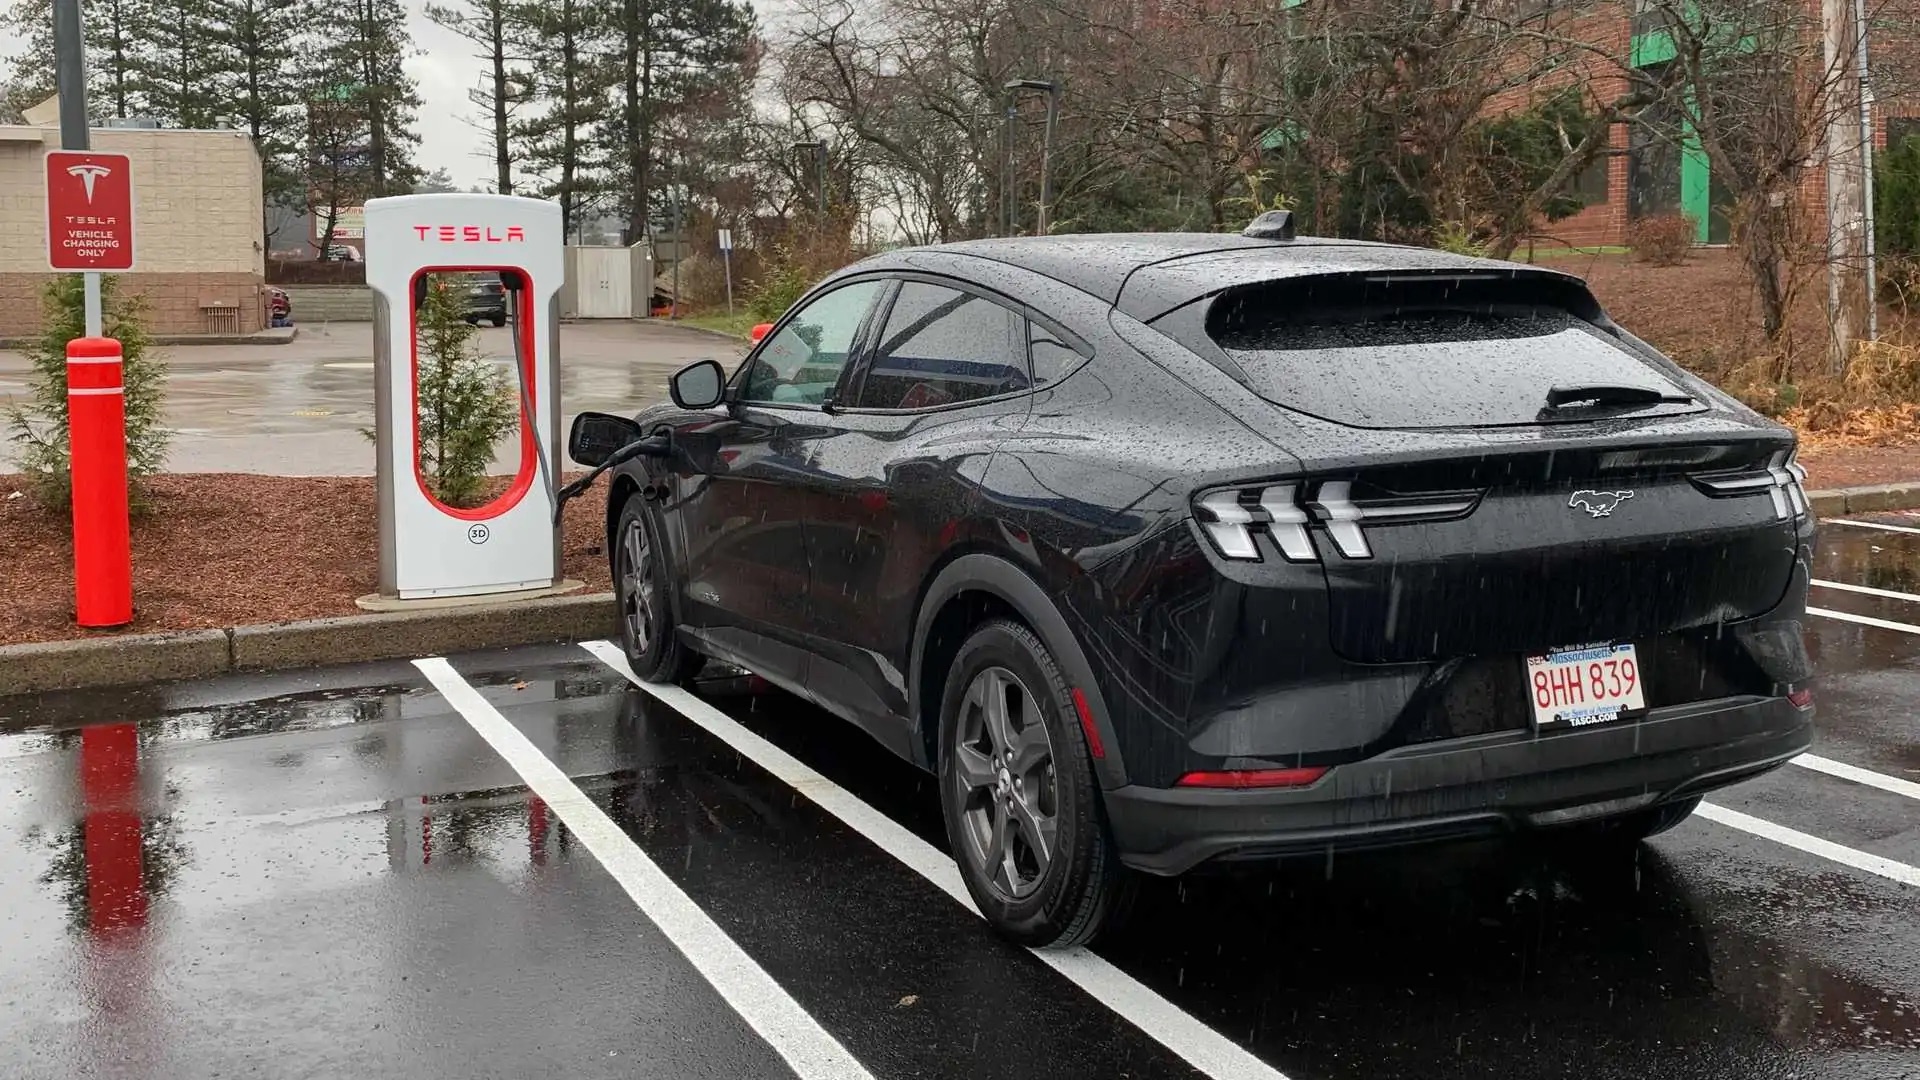 Tesla to open 12000 Superchargers to Ford across U.S. and Canada